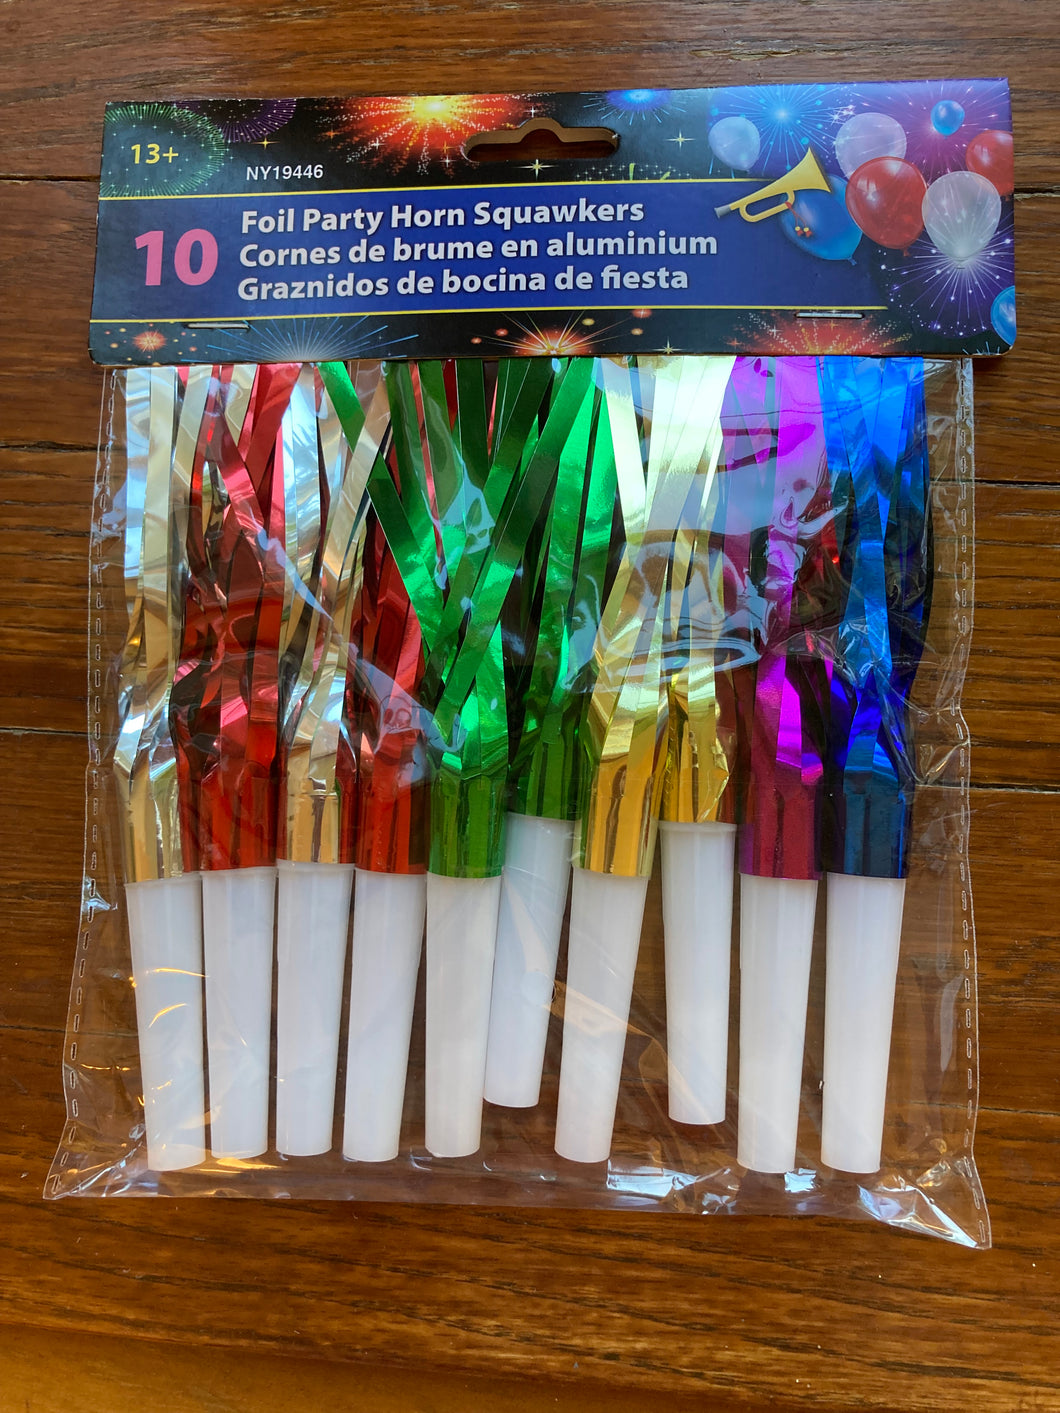 10 Foil Party Horn Squawkers - New Year's